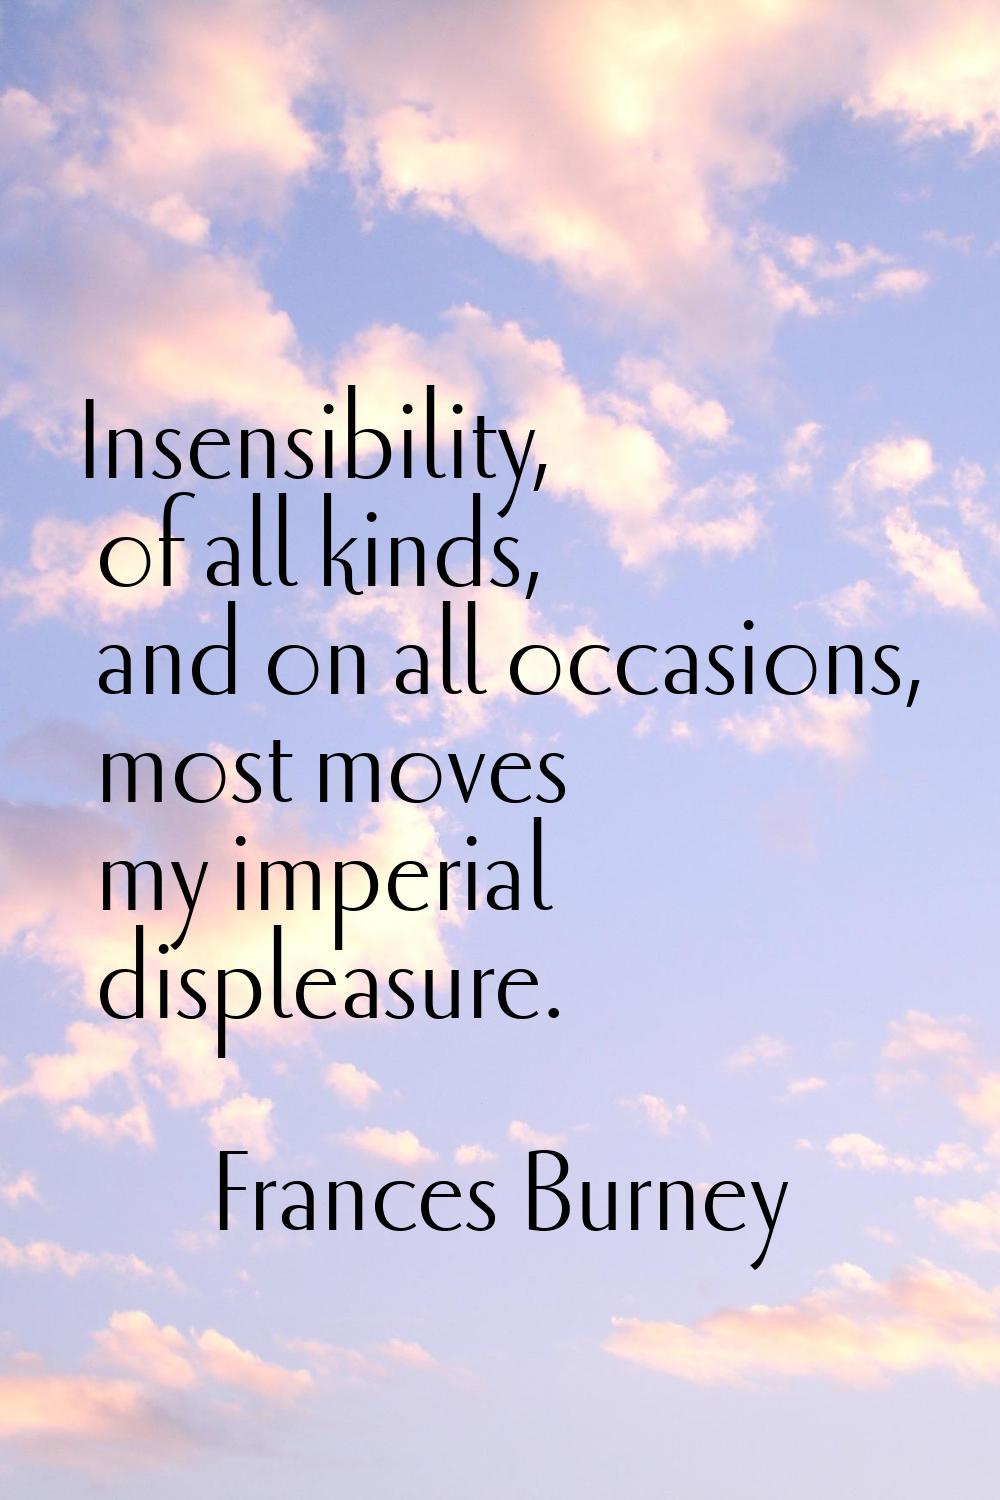 Insensibility, of all kinds, and on all occasions, most moves my imperial displeasure.